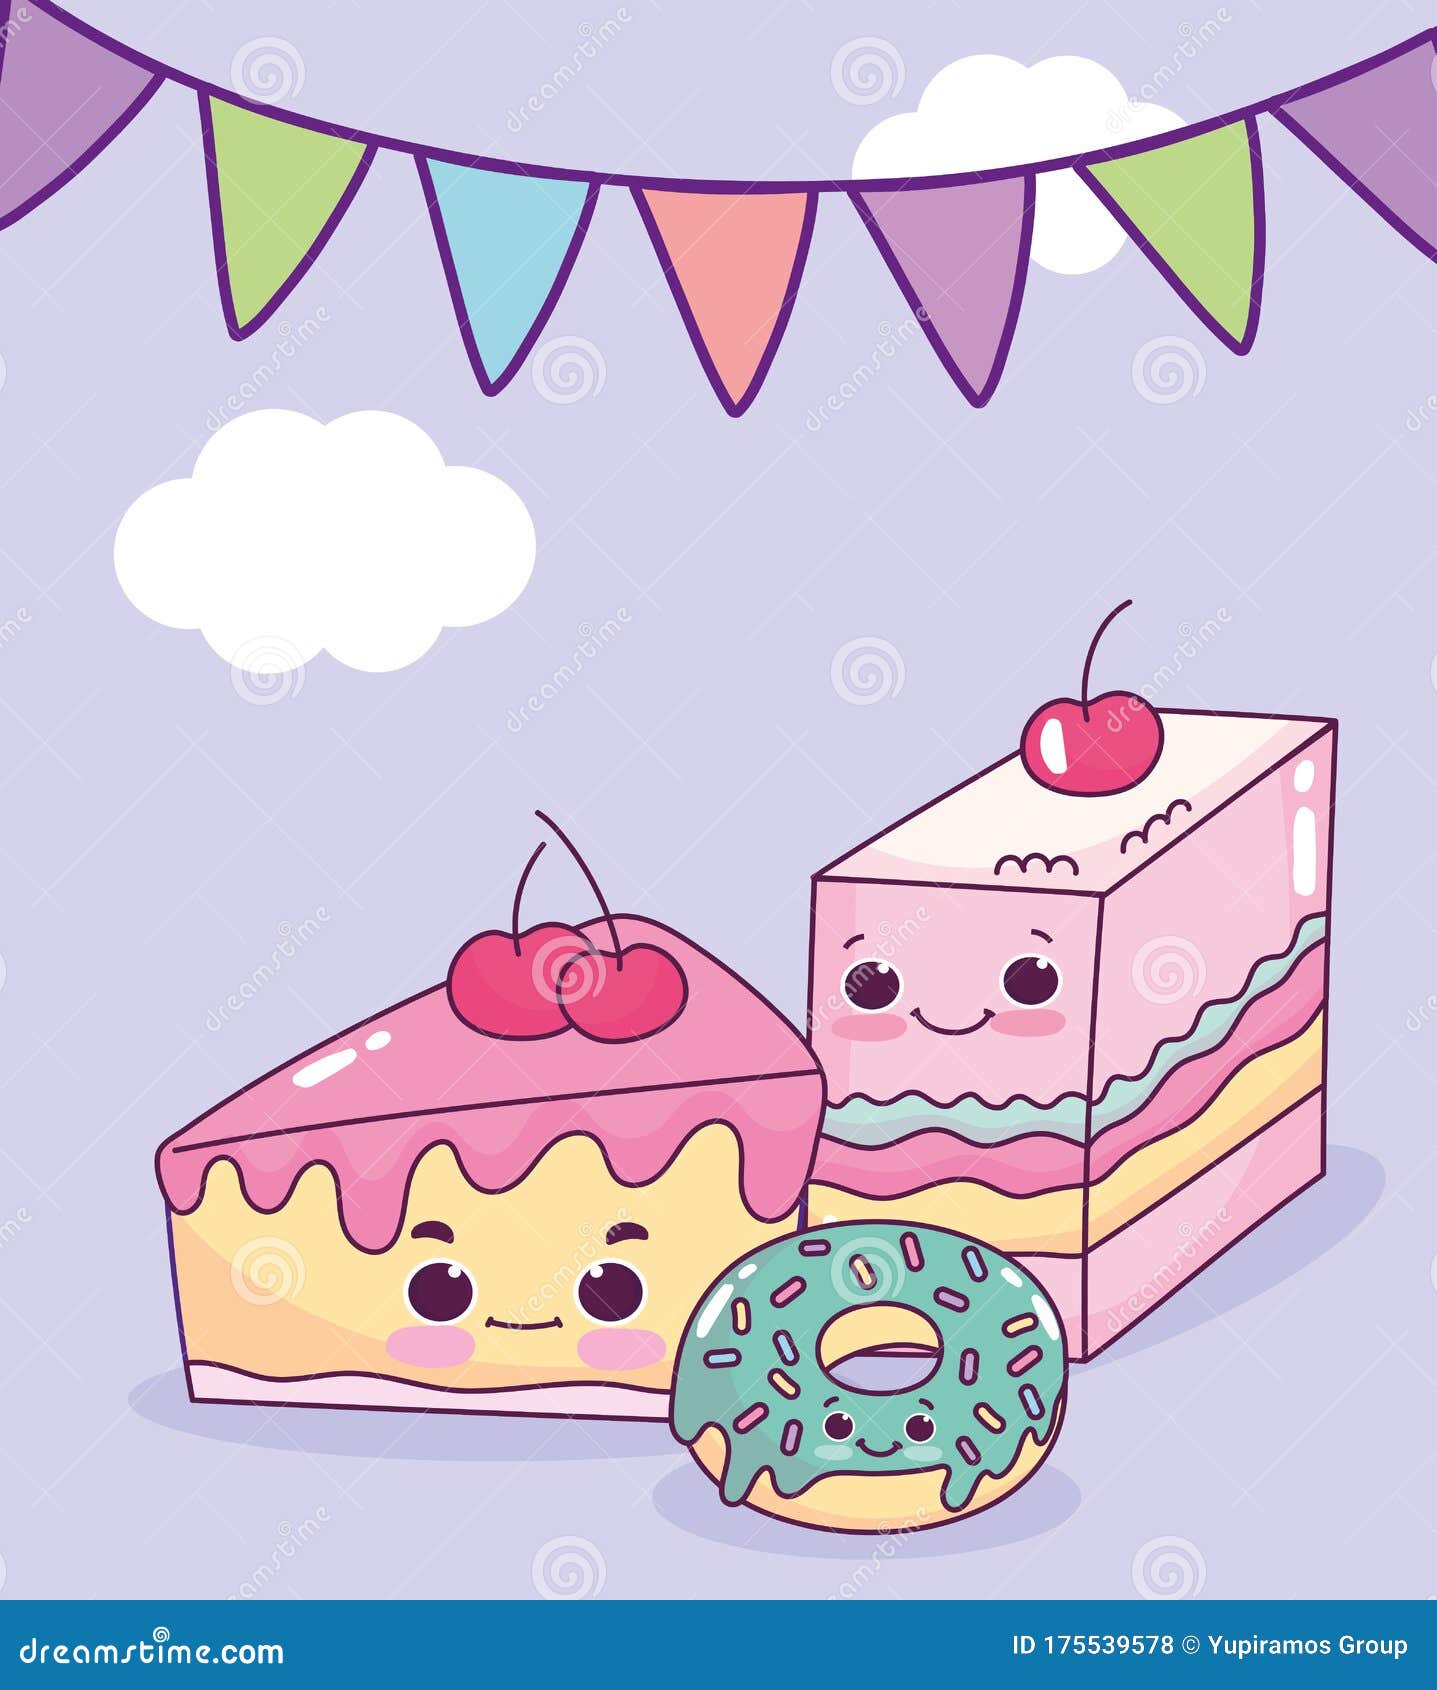 Cute Food Jelly Cake and Donut Sweet Dessert Pastry Cartoon Stock Vector -  Illustration of pastry, icon: 175539578